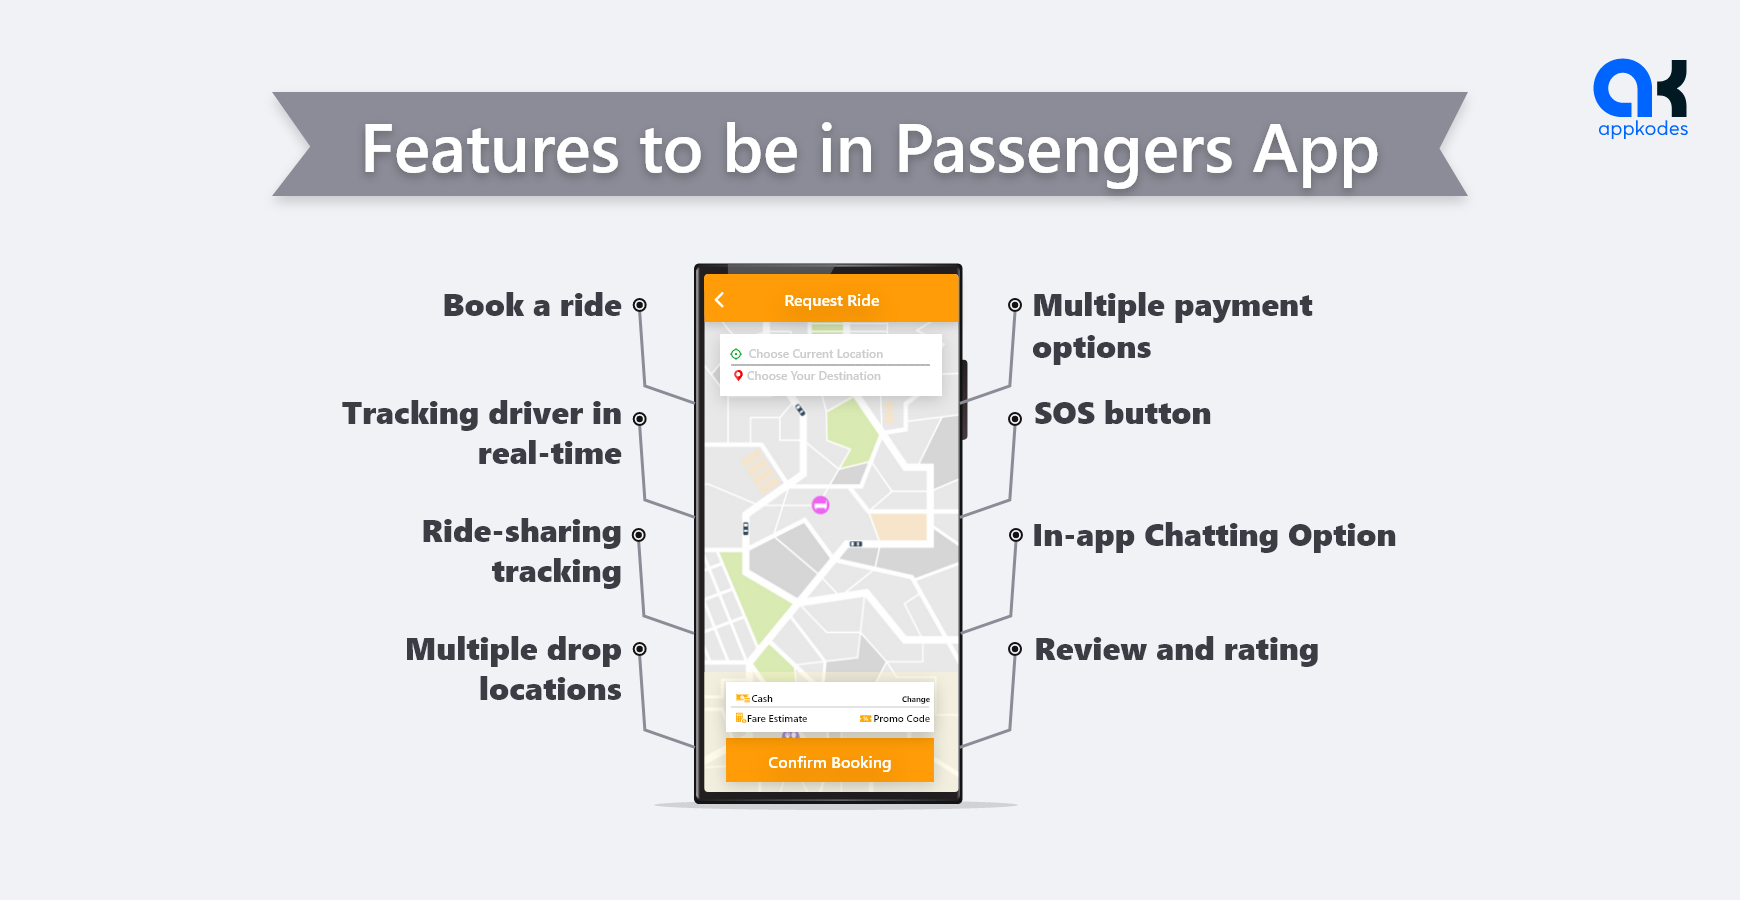 Features to be in Passengers App